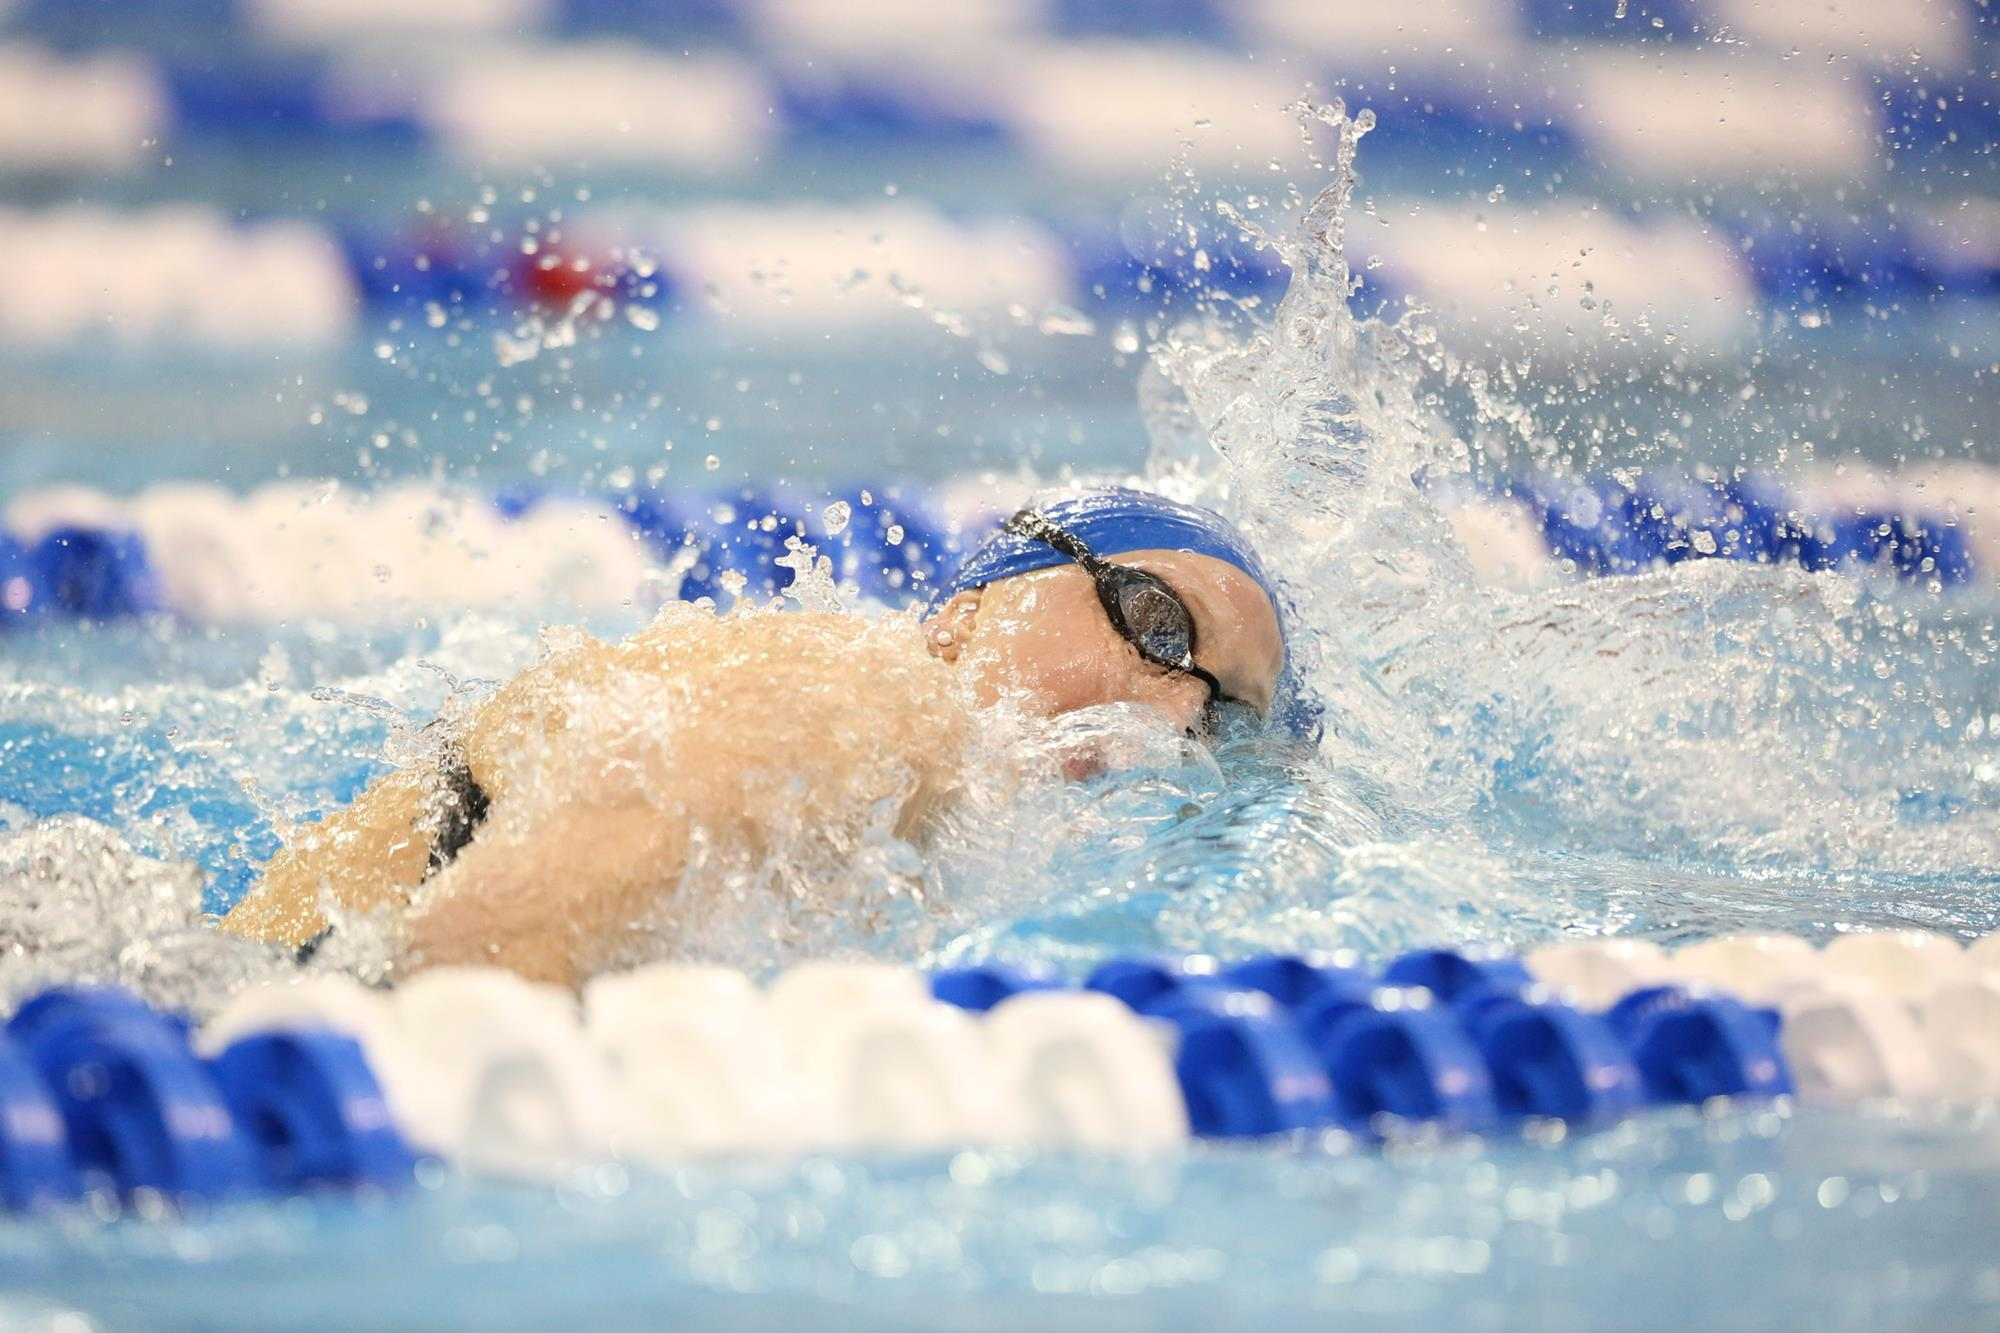 Kentucky Wraps Successful Summer at U.S. National Championships